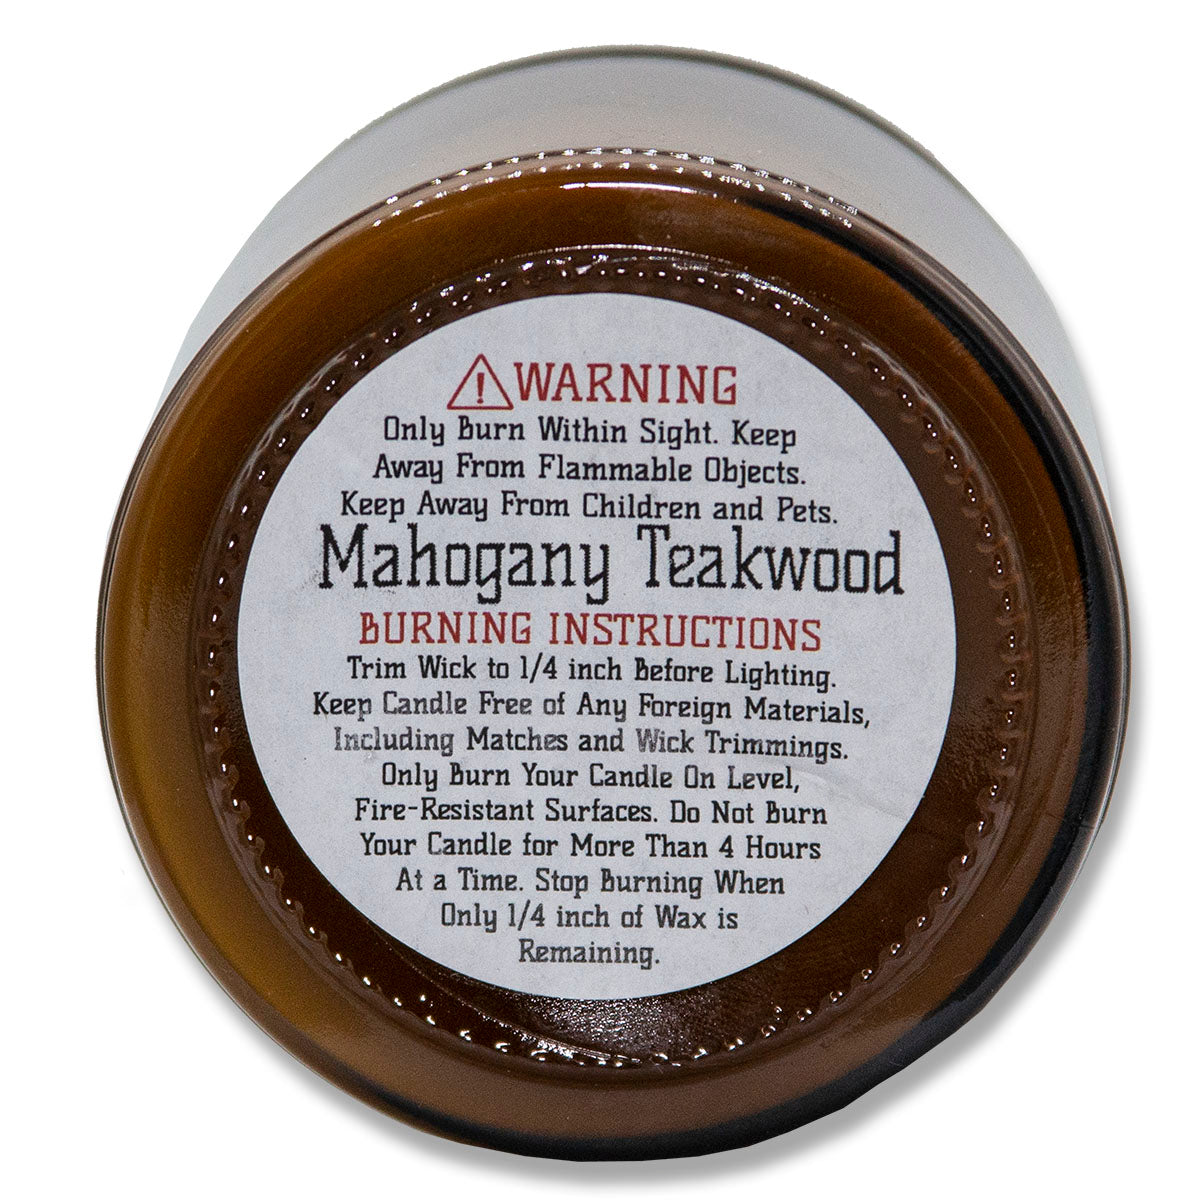 Mahogany Teakwood, Lone Star Candles & More's Premium Hand Poured Strongly Scented Soy Wax Gift Candle, A Rich Blend of Fine Woods and Florals, USA Made in Texas, Amber Glass Jar 9oz Happy Birthday